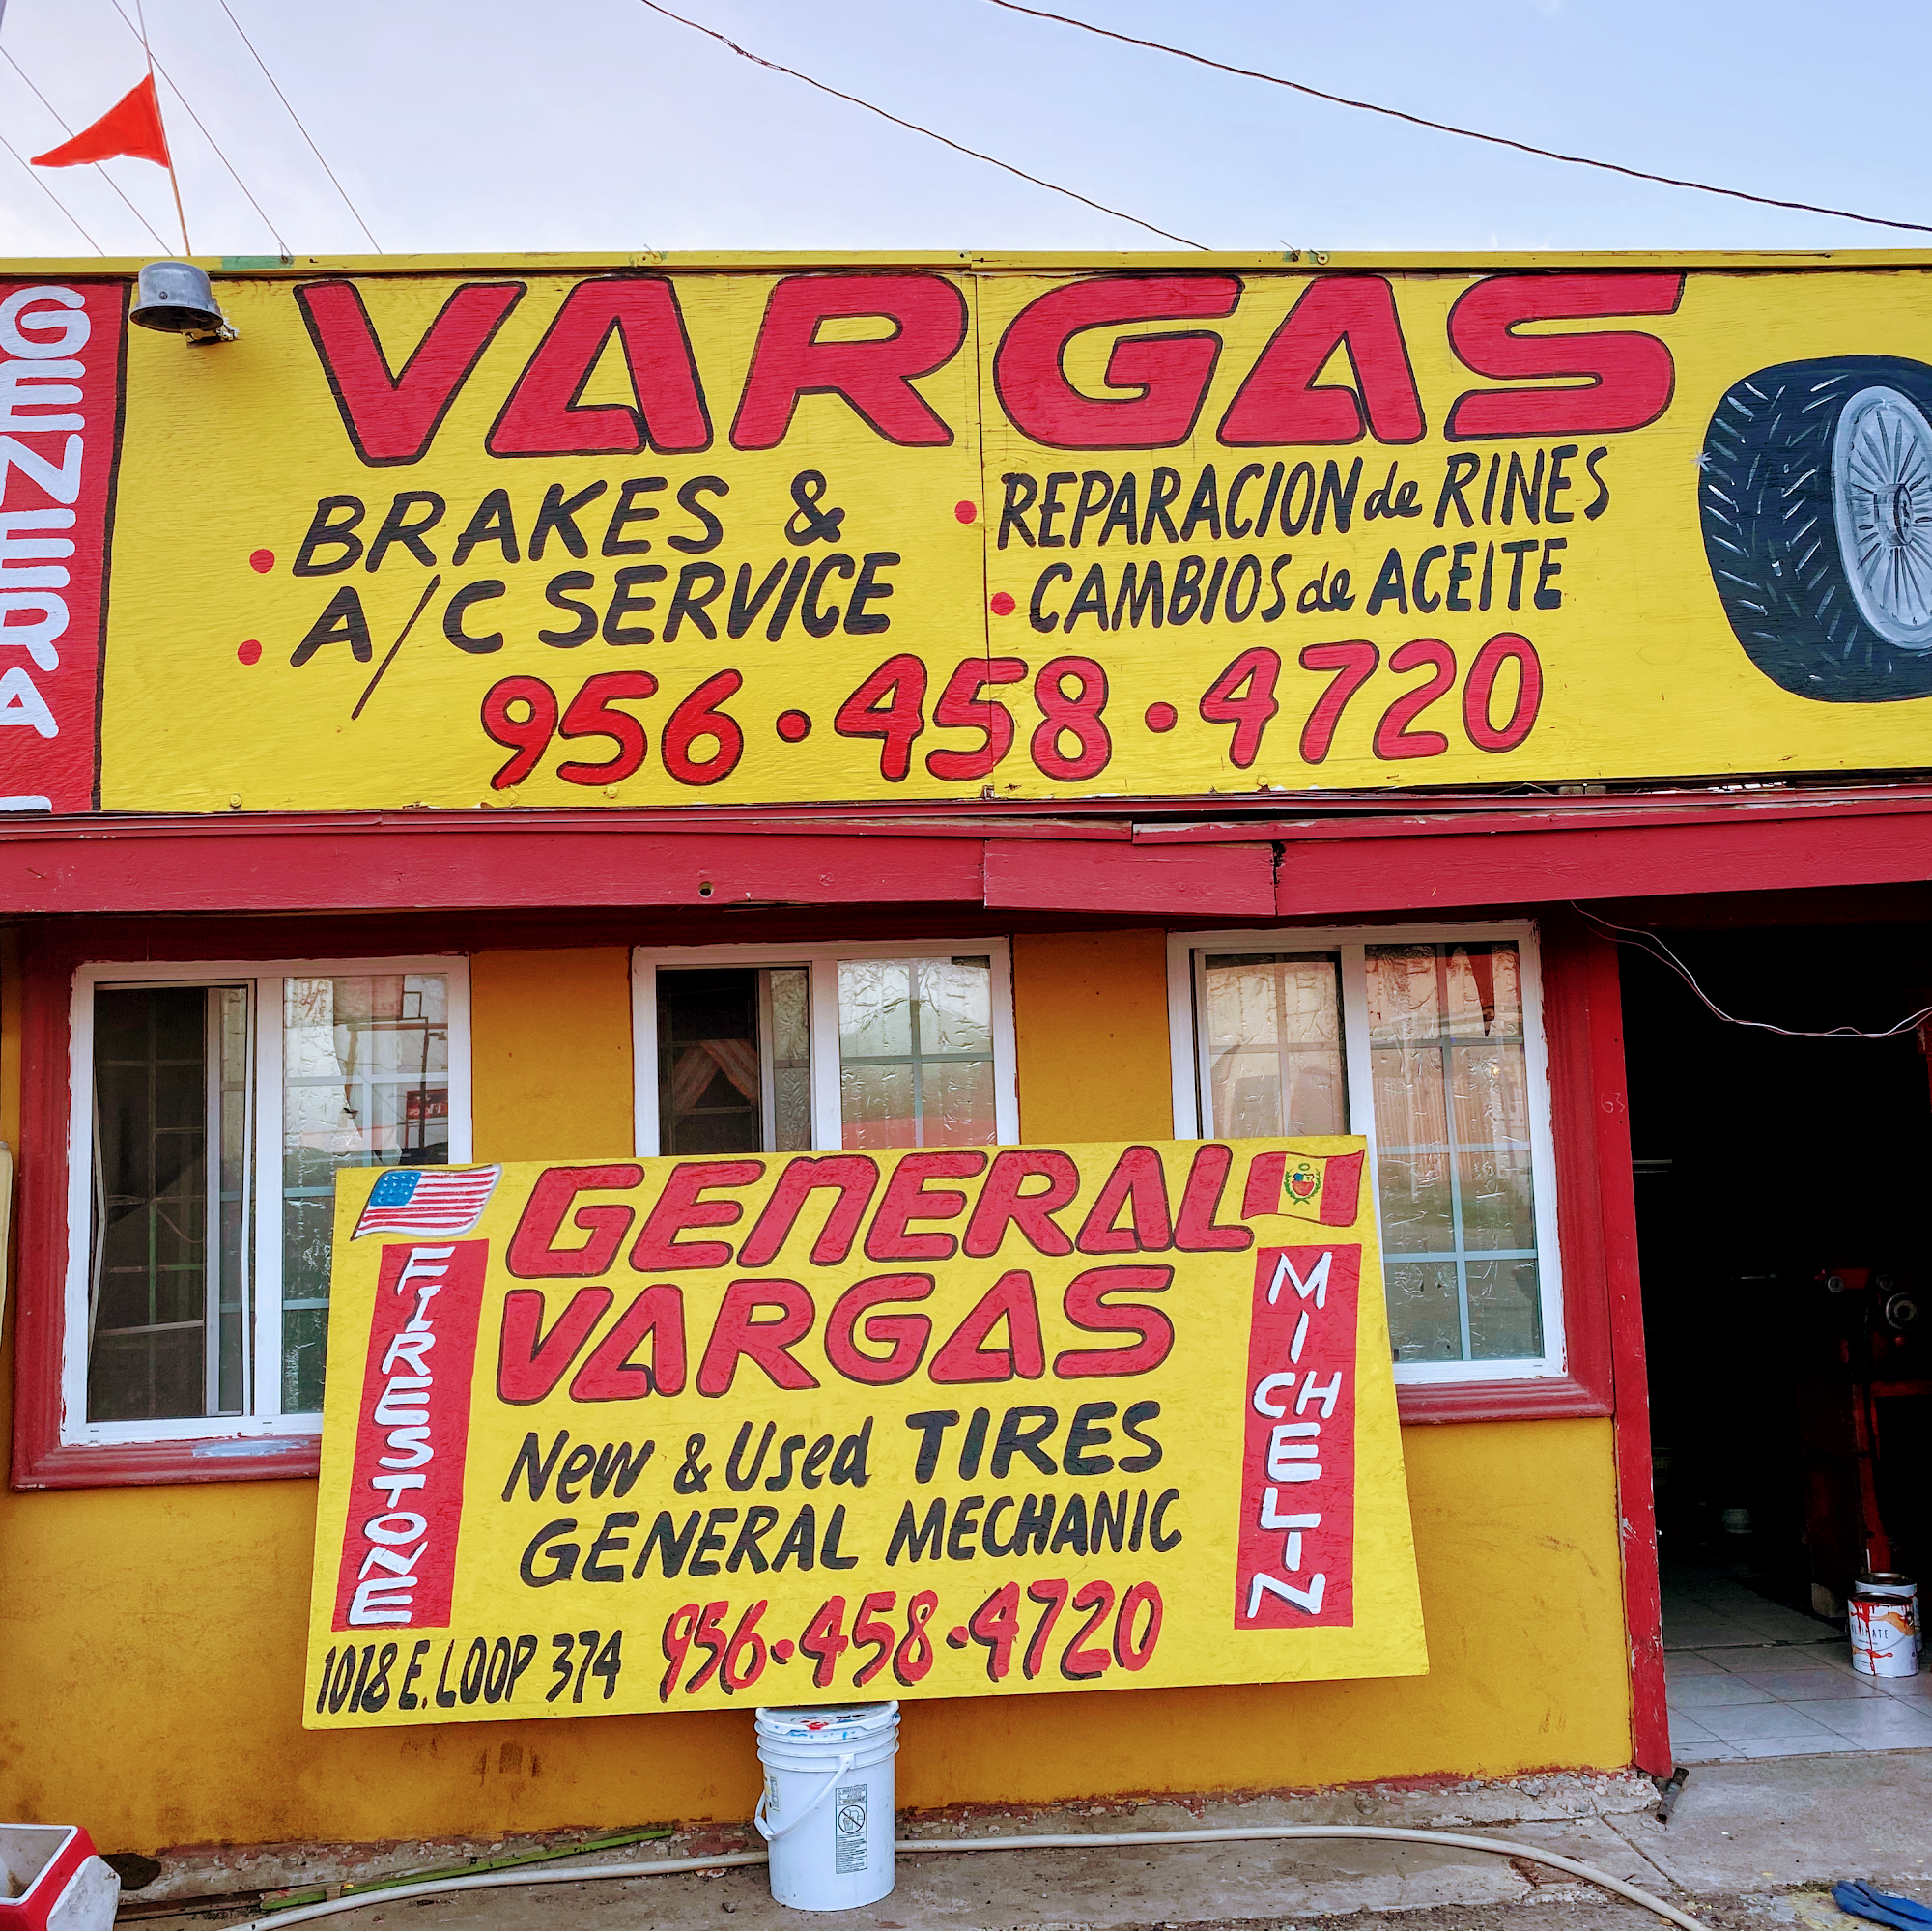 General Tires & Truck tire service